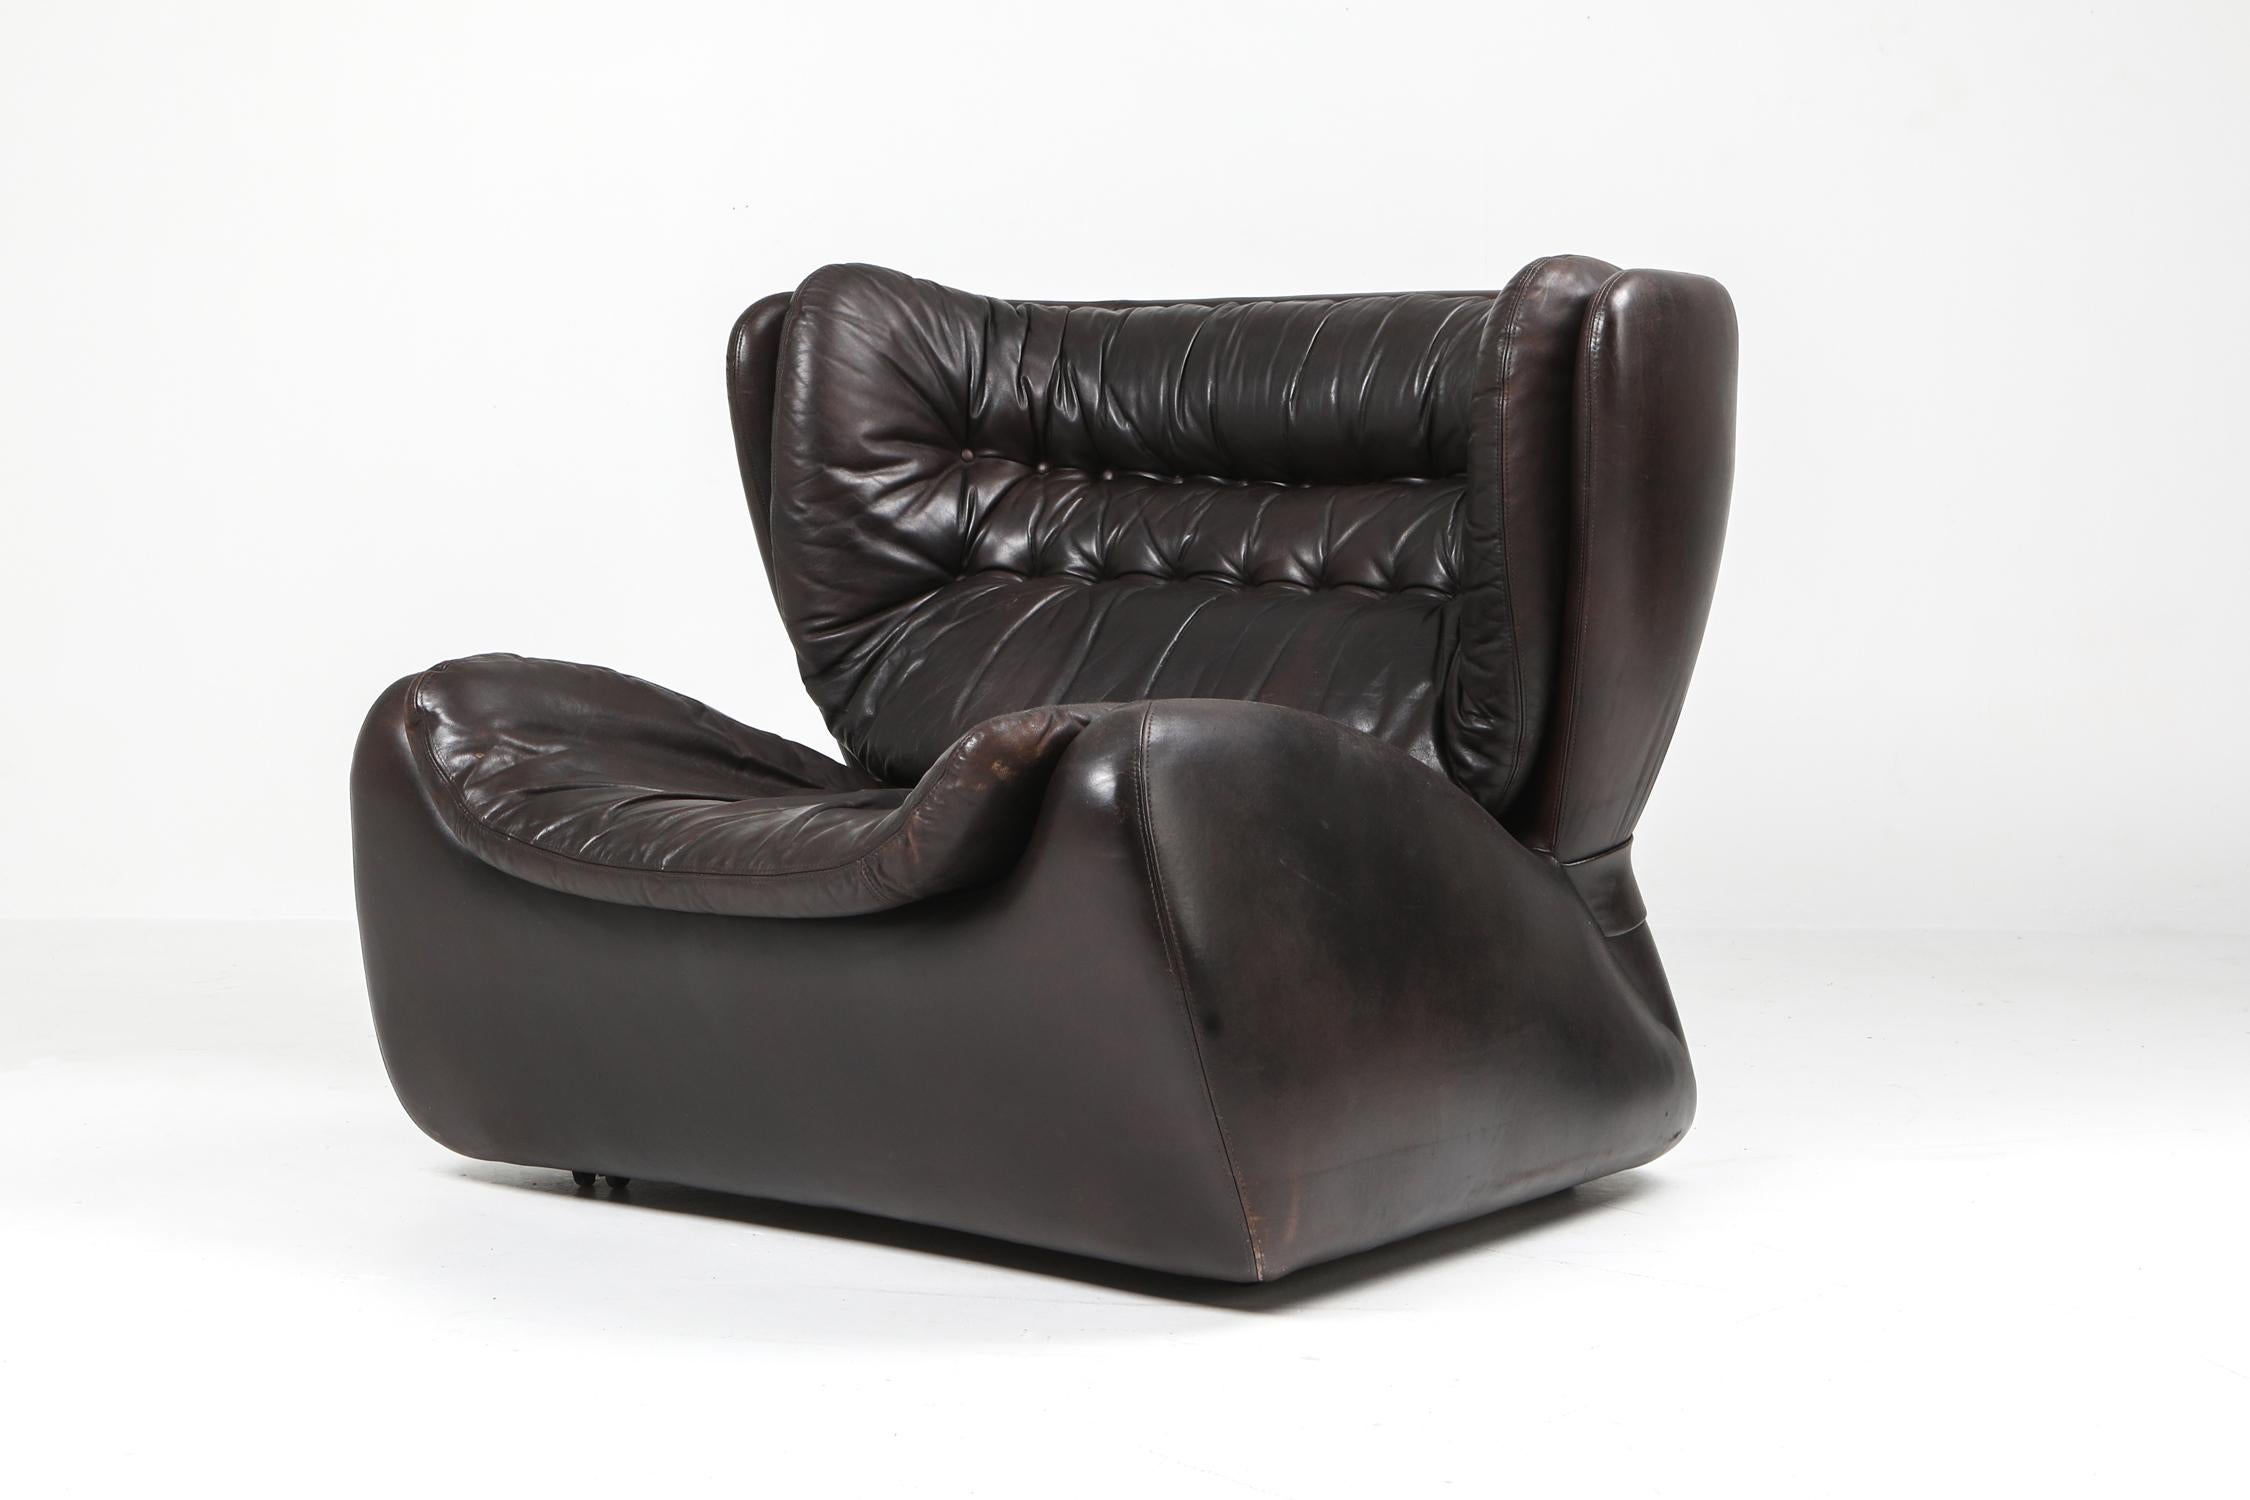 'Pasha' Lounge Chairs by Durlet in Dark Chocolate Leather For Sale 1